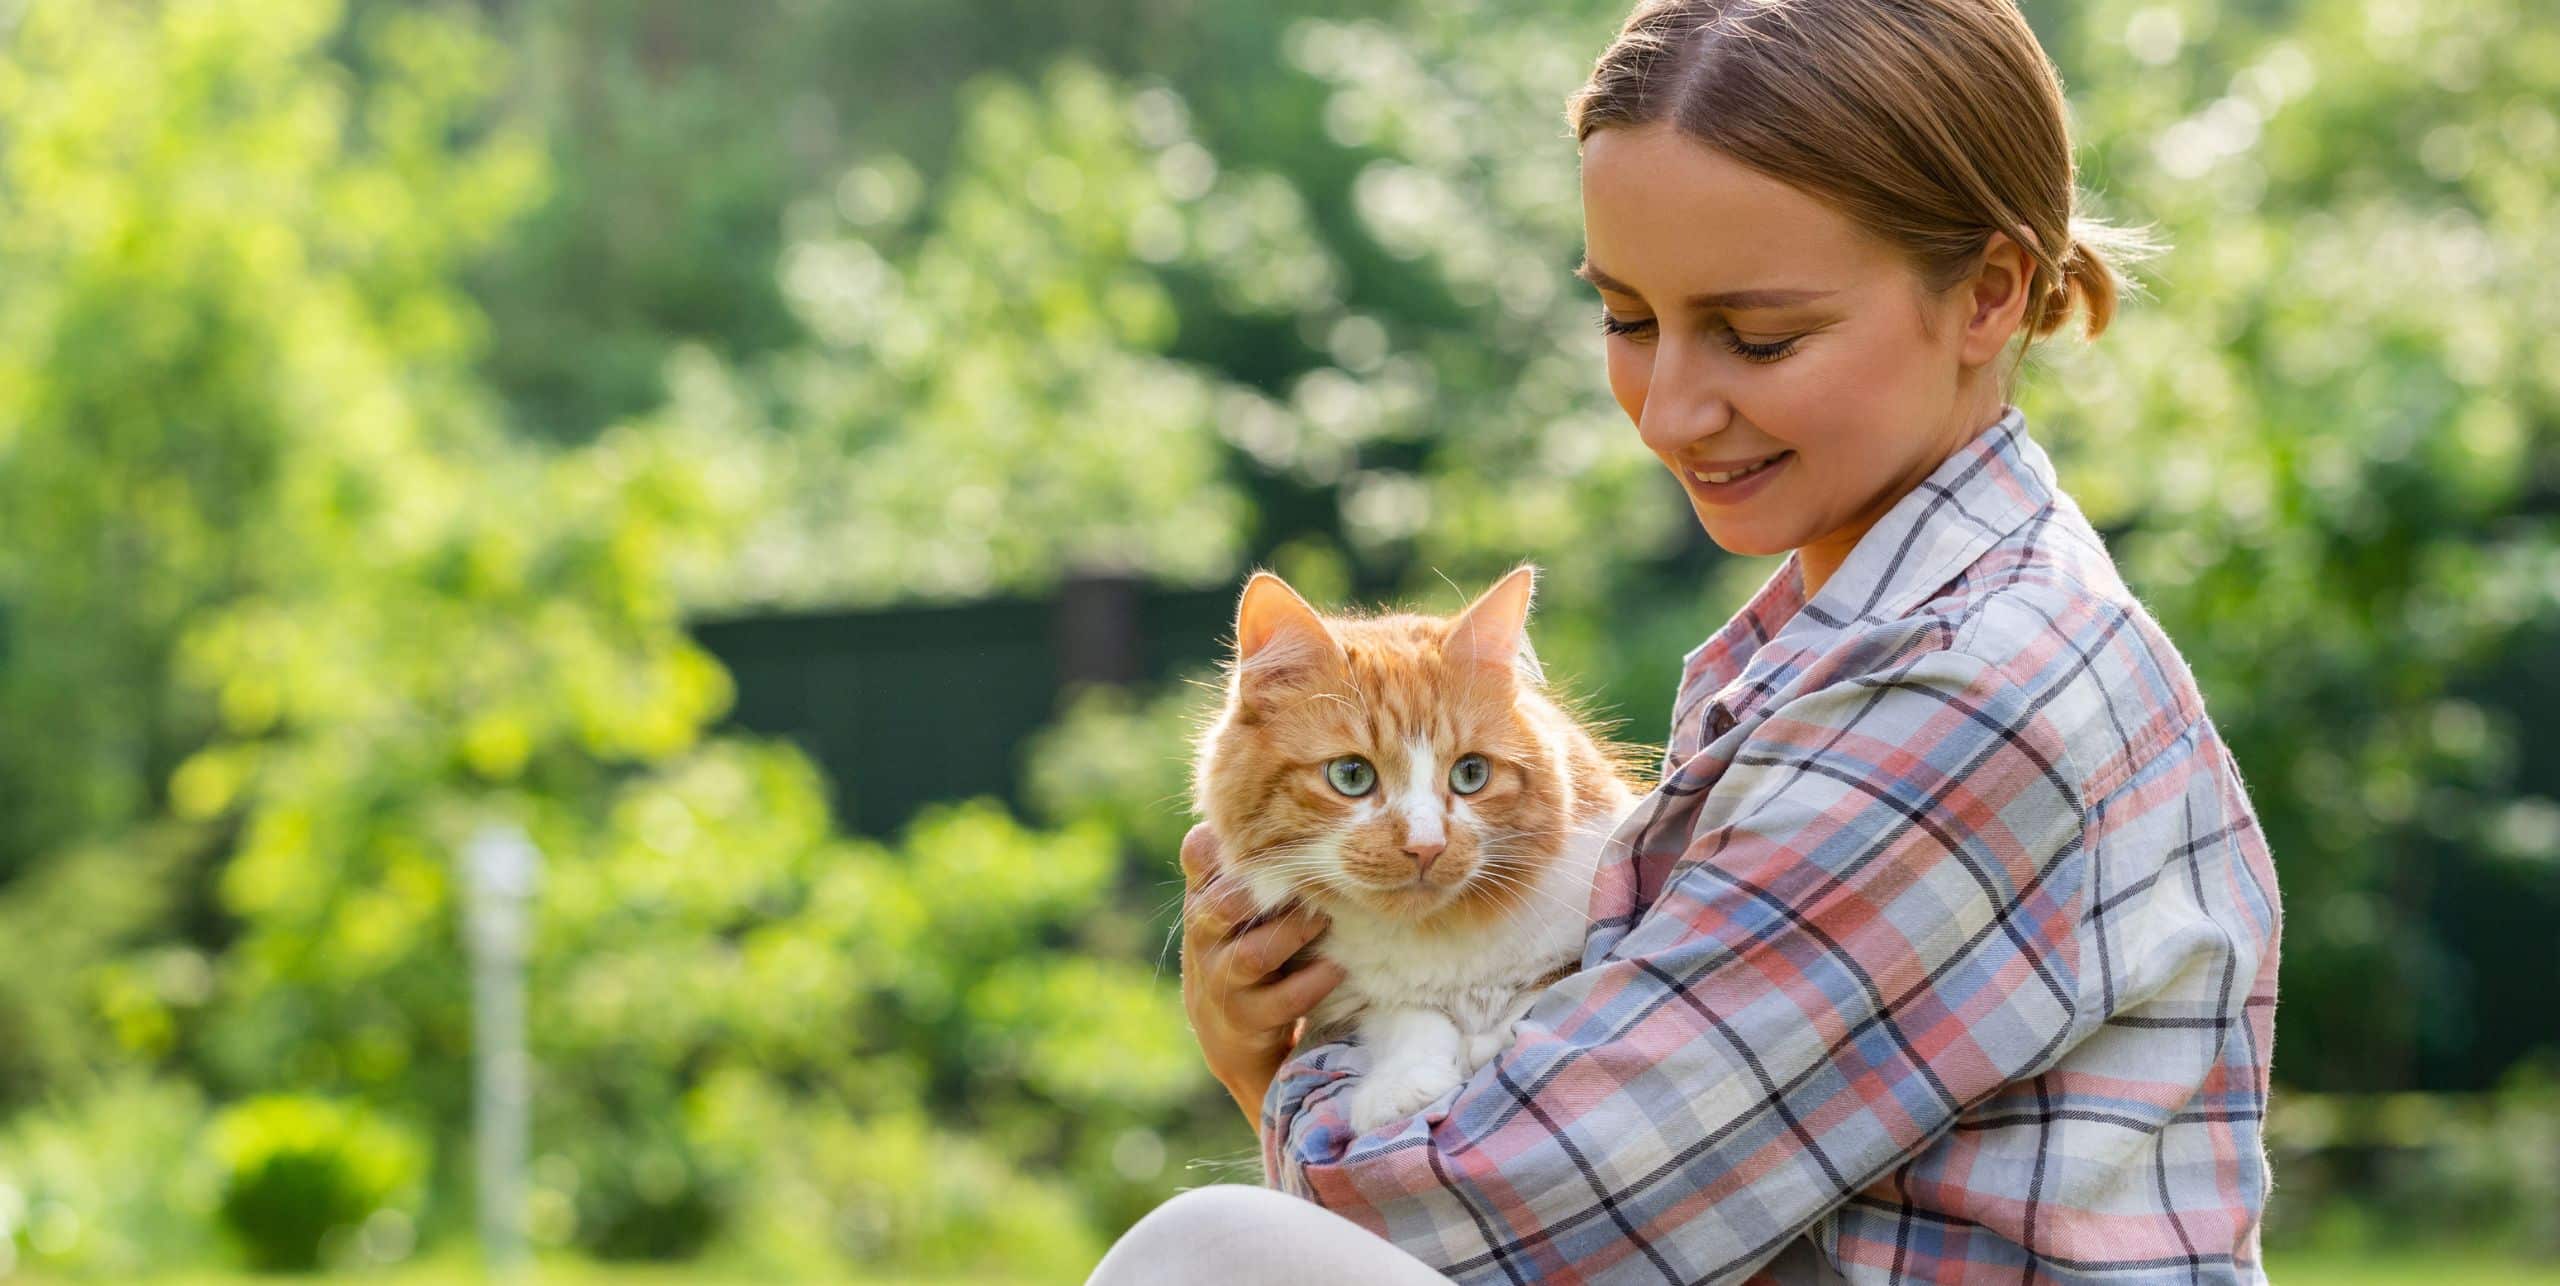 What are the responsibilities of eco-friendly pet owners?